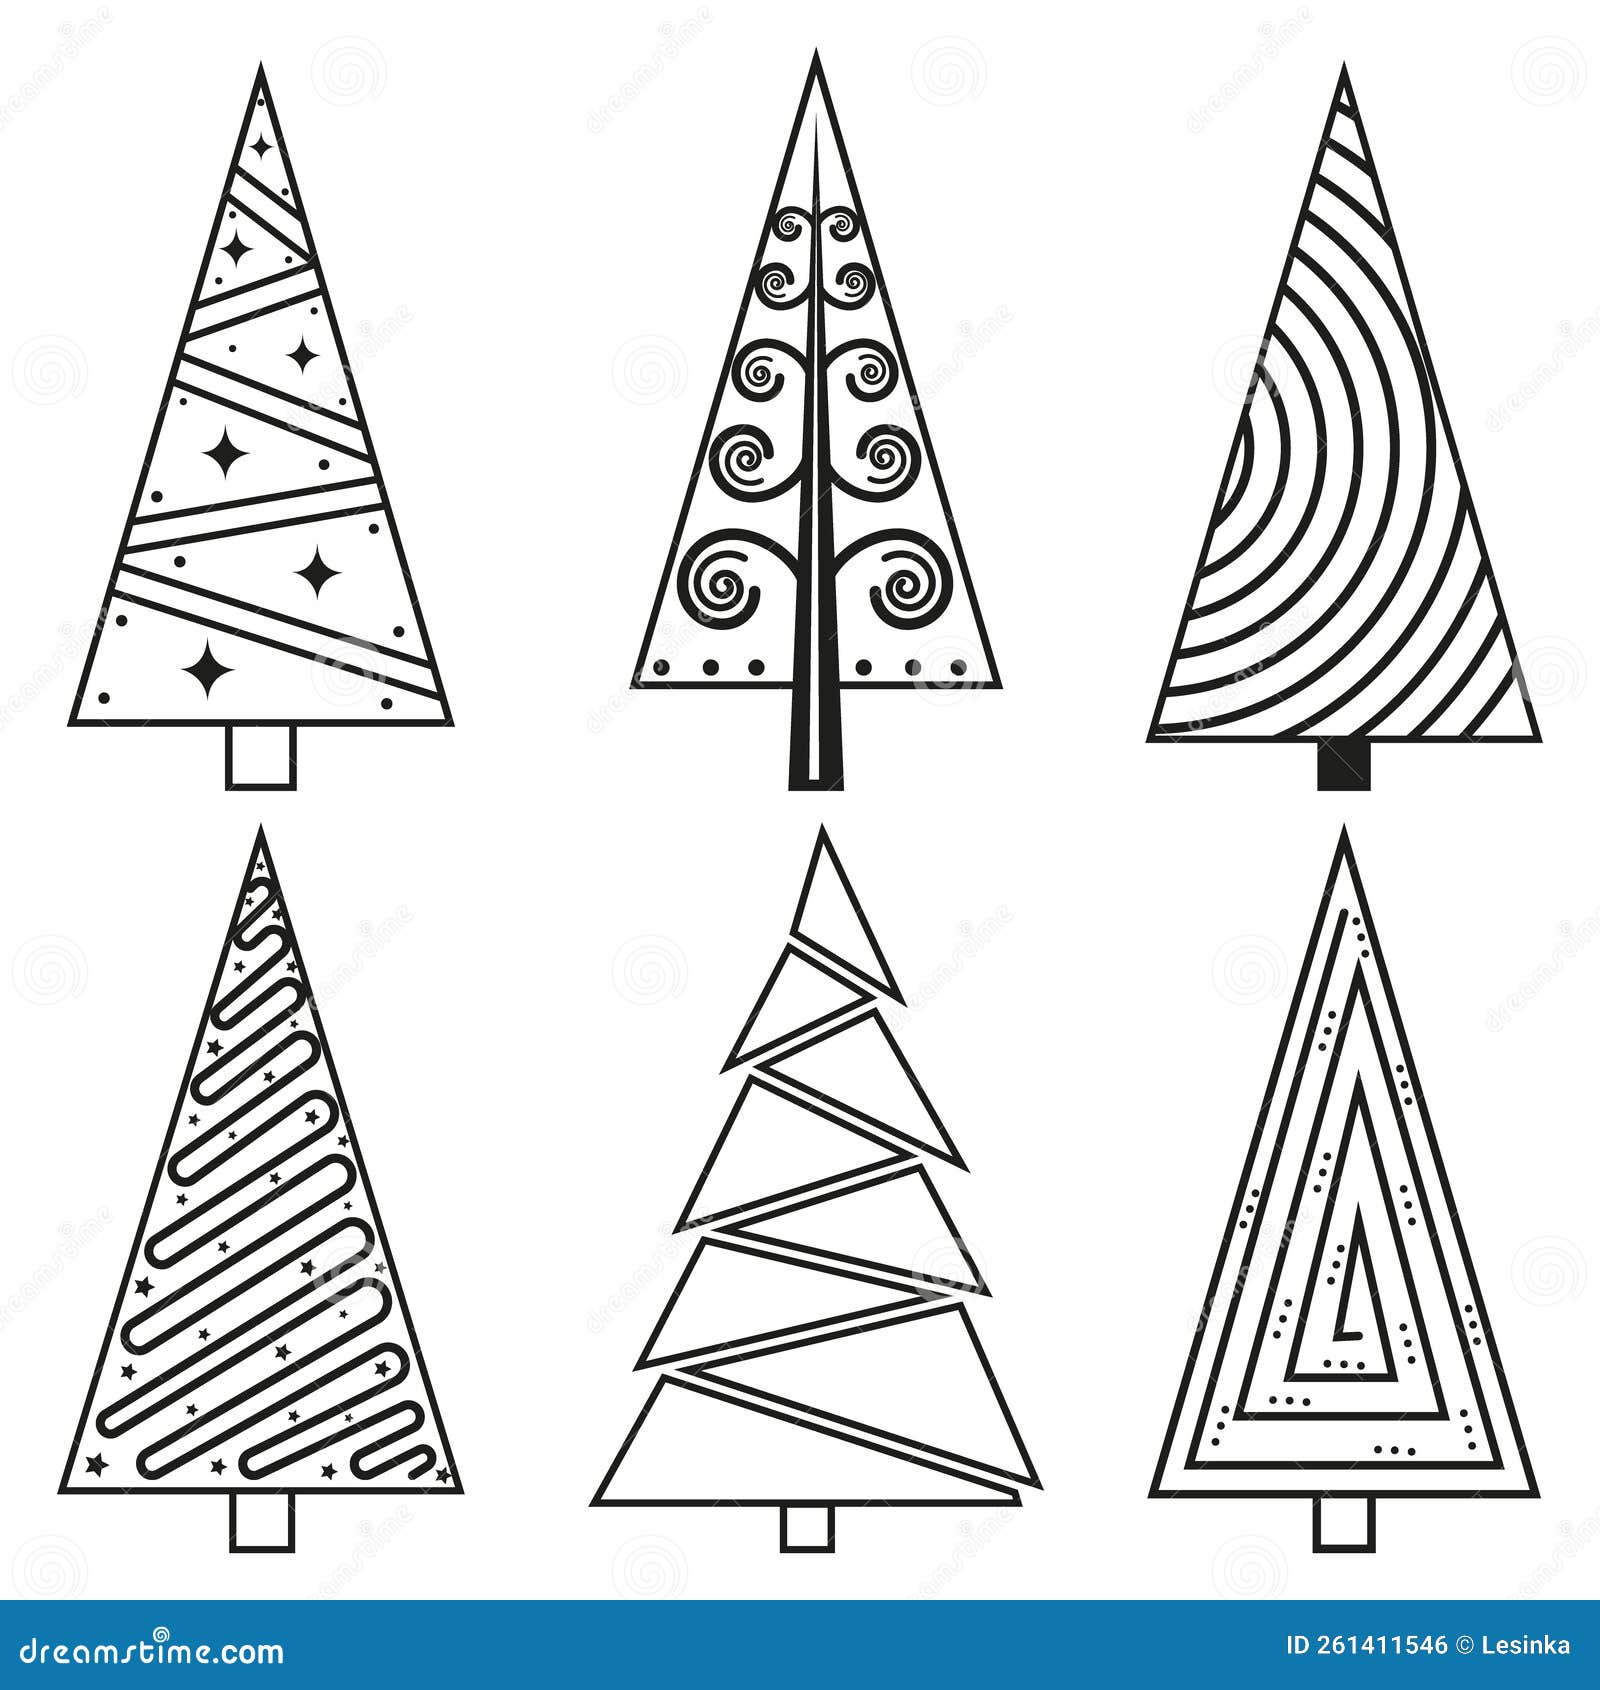 A Set of Christmas Trees in the Doodle Style, Black Outline. Isolated ...